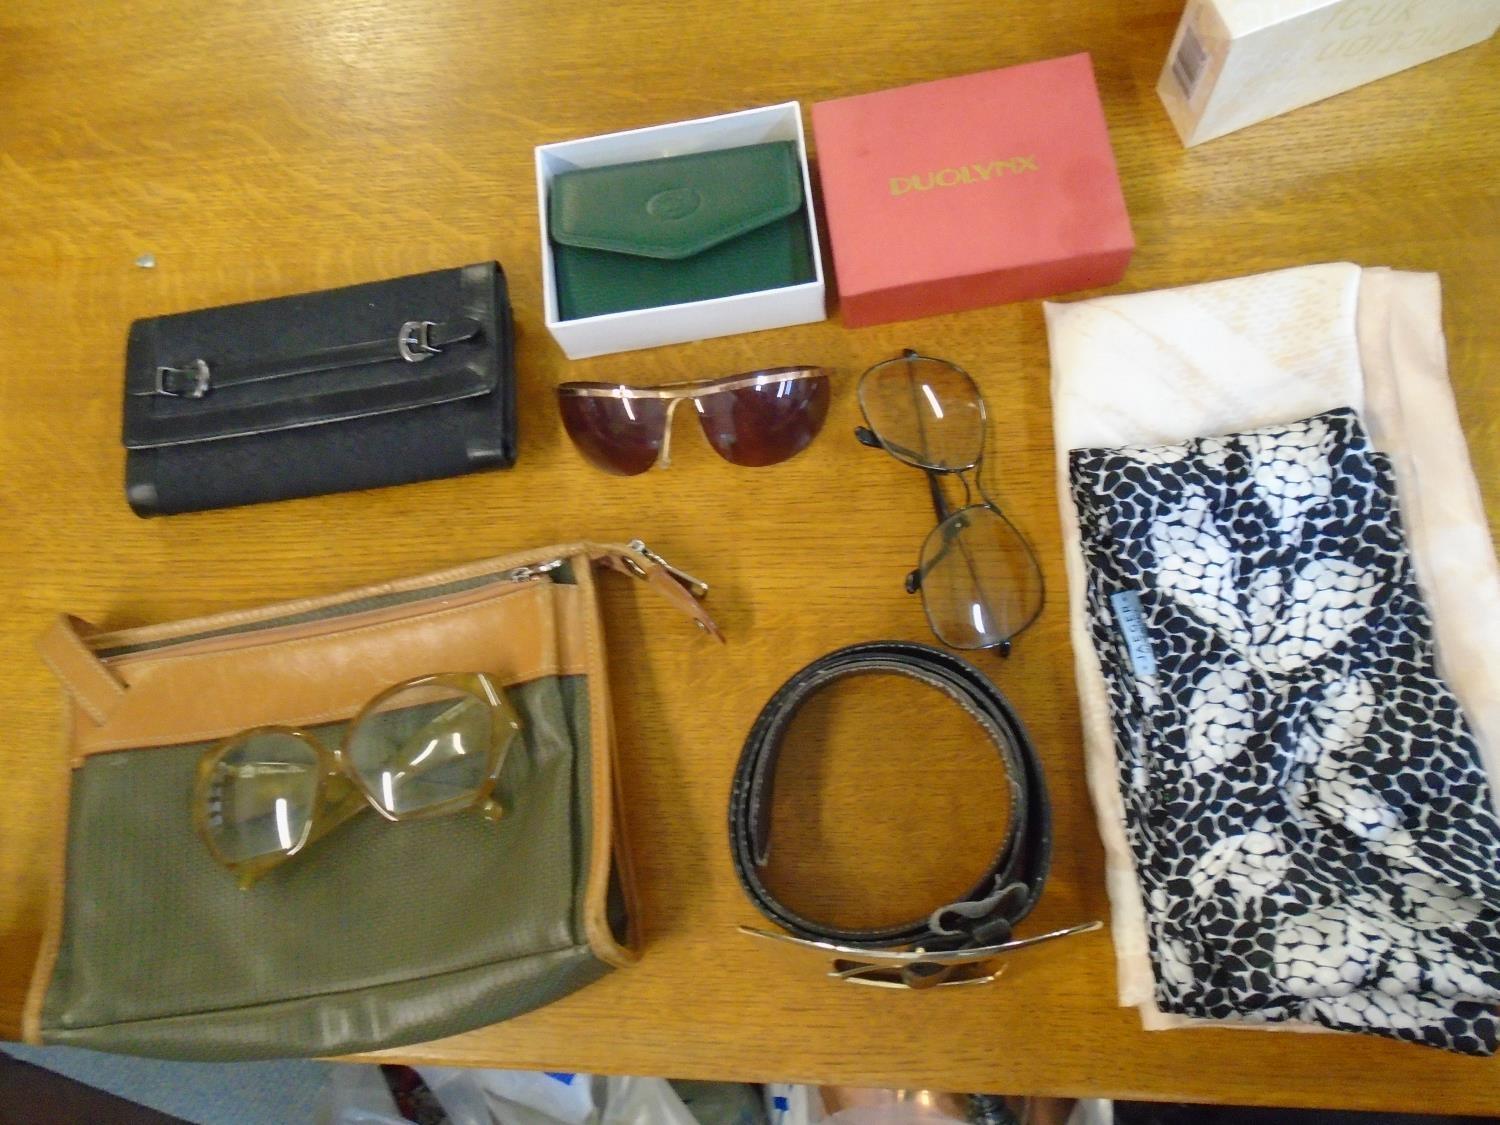 A selection of fashion items to include a Charles Jourdan wash bag, Christian Dior glasses,